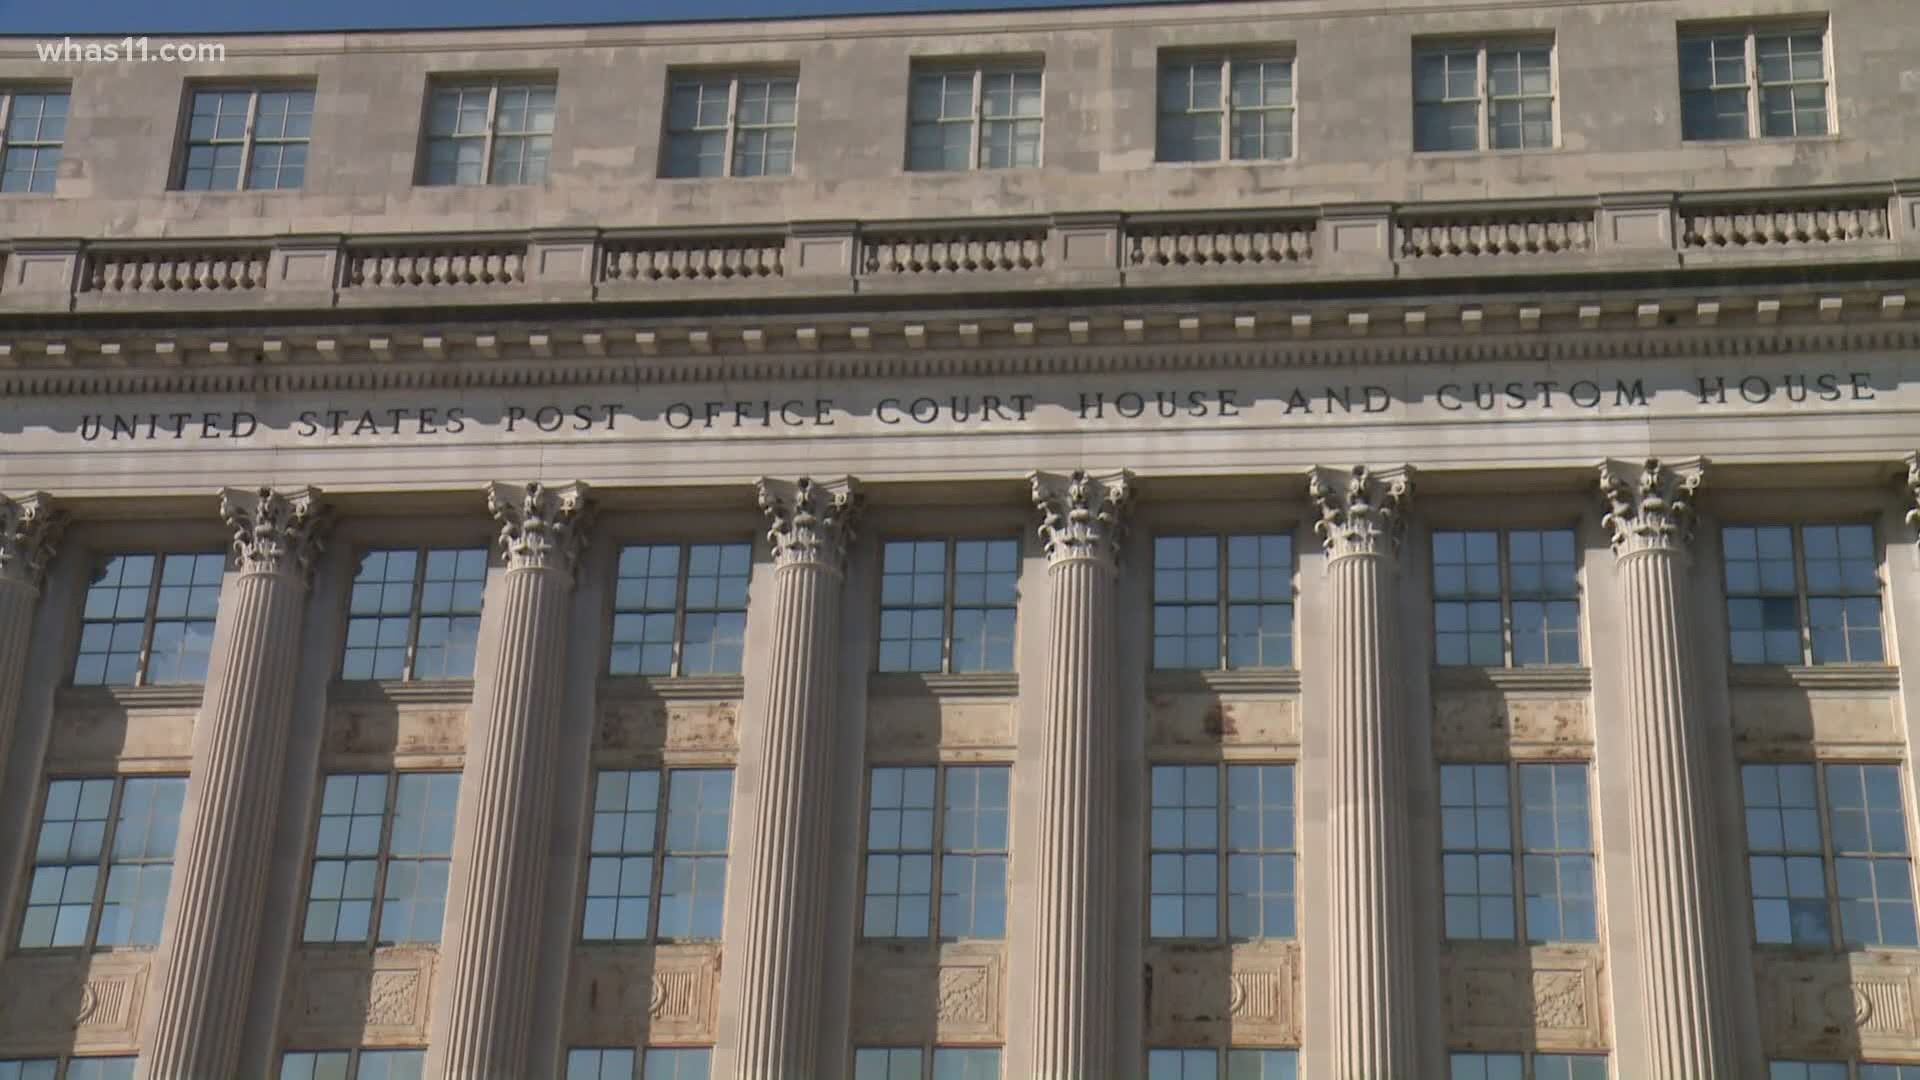 A judge ordered the federal courthouse in Louisville to close September 21-25, 2020.